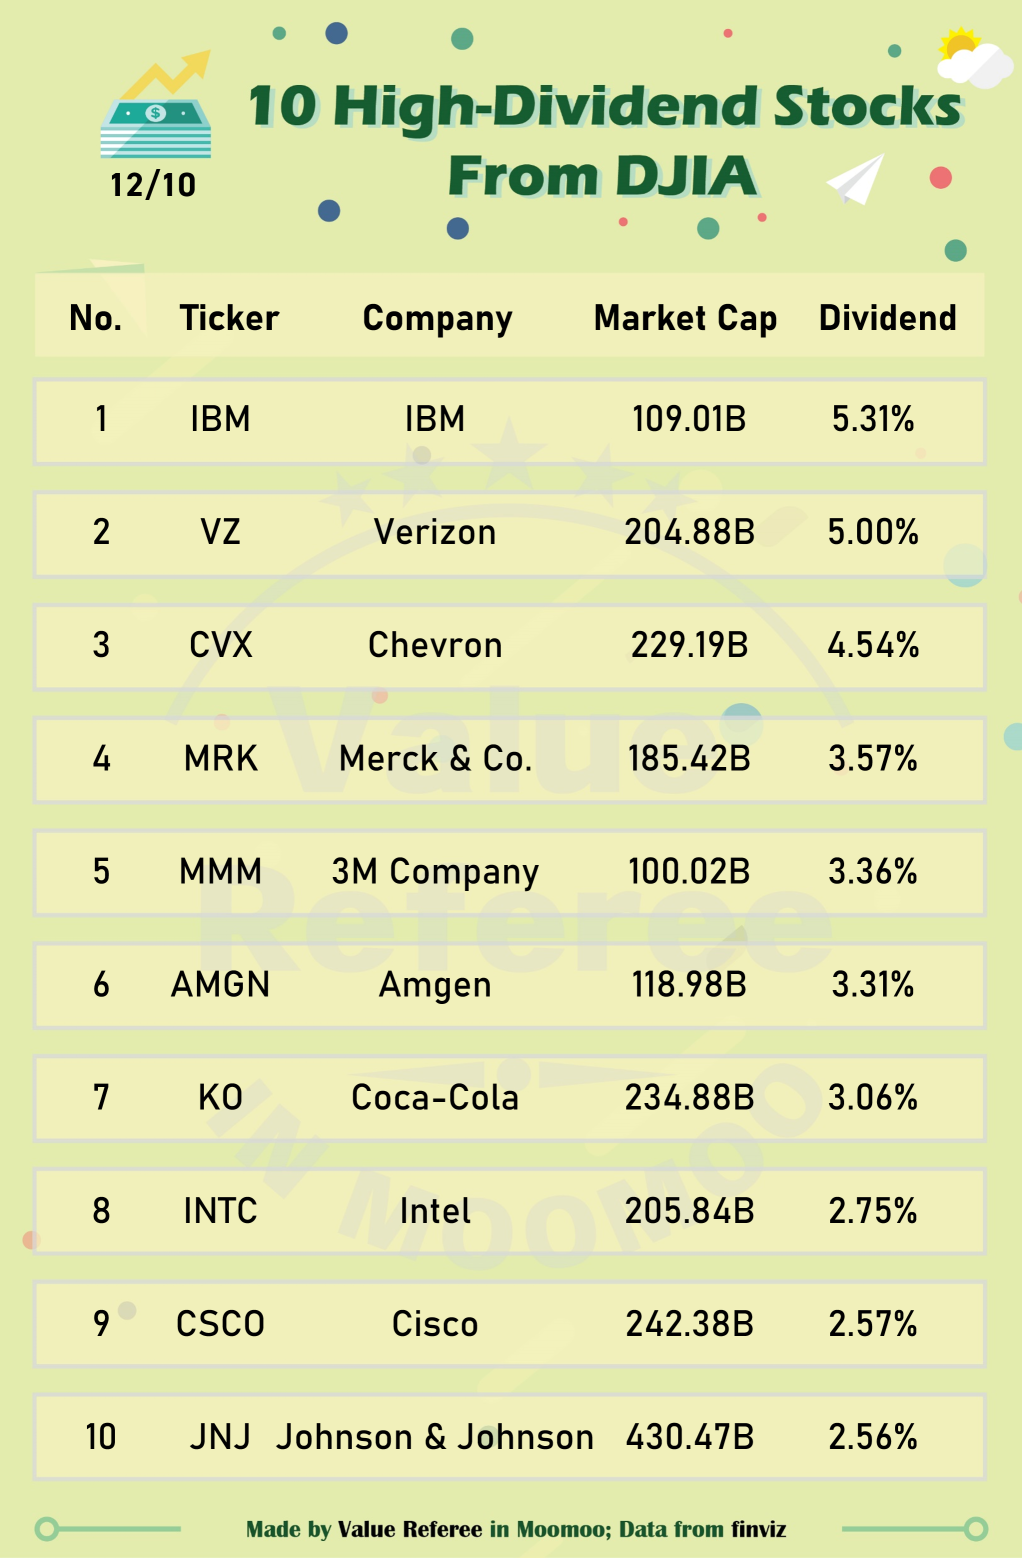 Which large-cap stocks have the highest dividends in Dow Jones index?